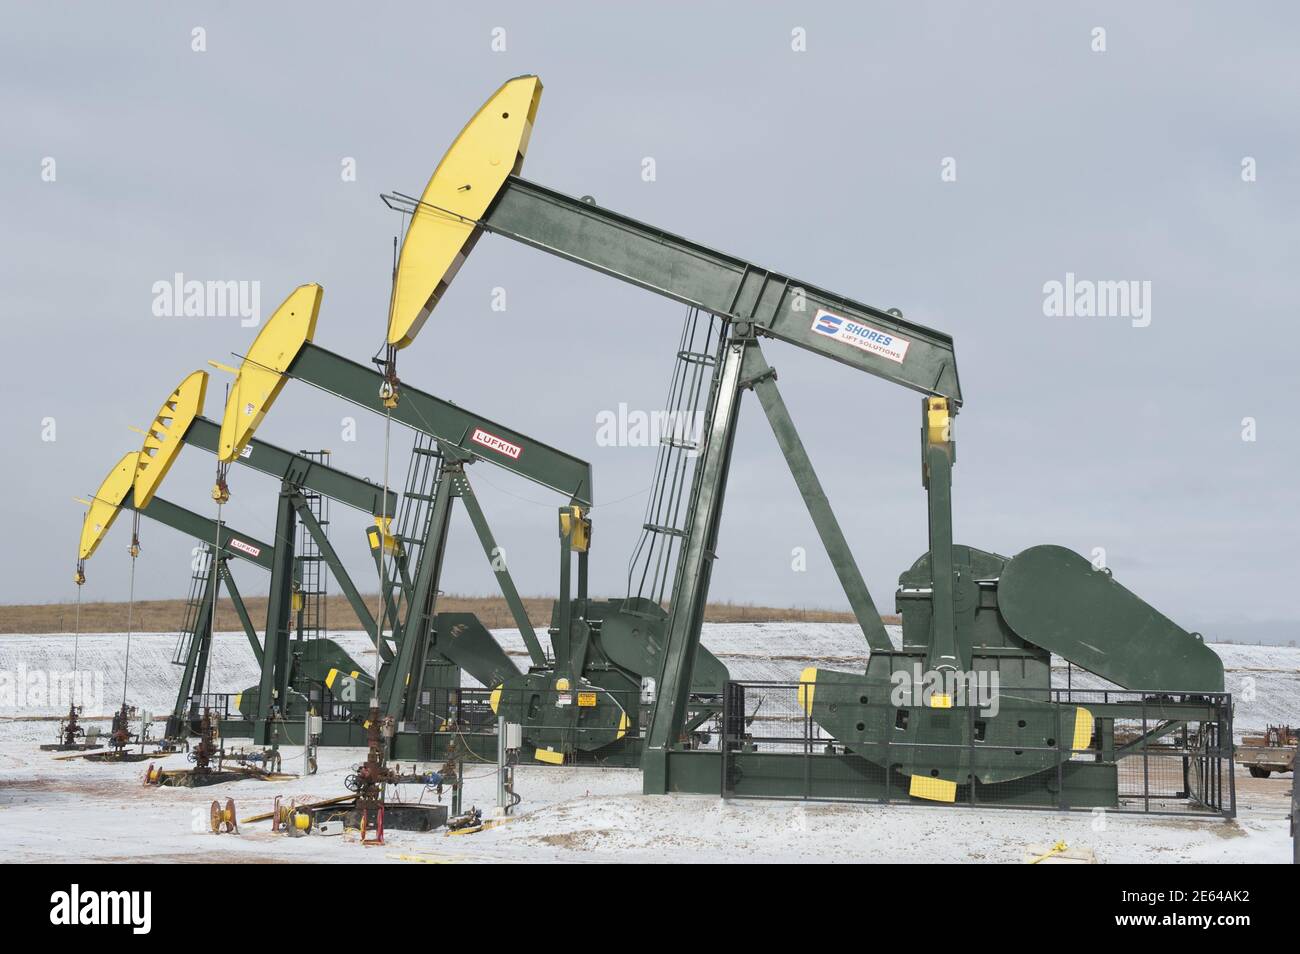 Pumpjacks taken out of production temporarily stand idle at a Hess site while new wells are fracked near Williston, North Dakota November 12, 2014.  Falling oil prices have yet to spoil North Dakota's party, with billions of investment dollars still flowing for new wells and pipelines, apartments and shopping centers, a tacit bet the third energy boom in the state's history is just getting started. Picture taken November 12, 2014. REUTERS/Andrew Cullen  (UNITED STATES - Tags: BUSINESS COMMODITIES ENERGY) Stock Photo